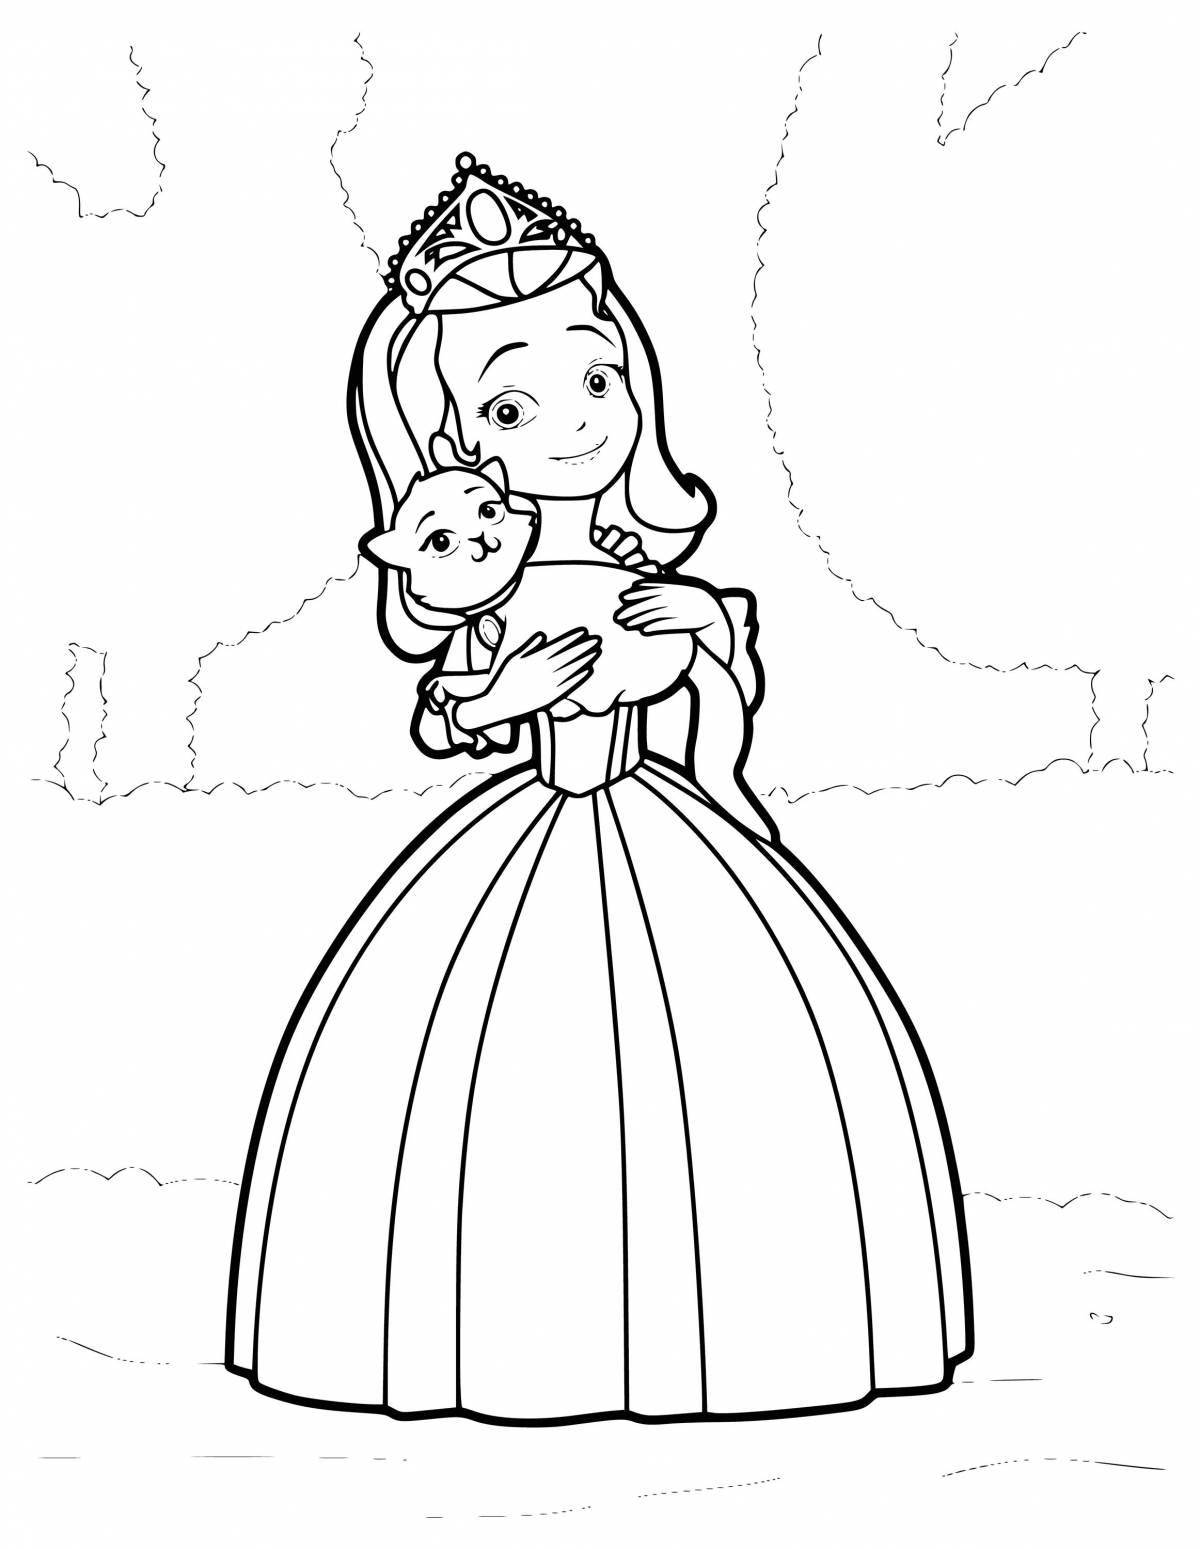 Princess coloring book with a cat